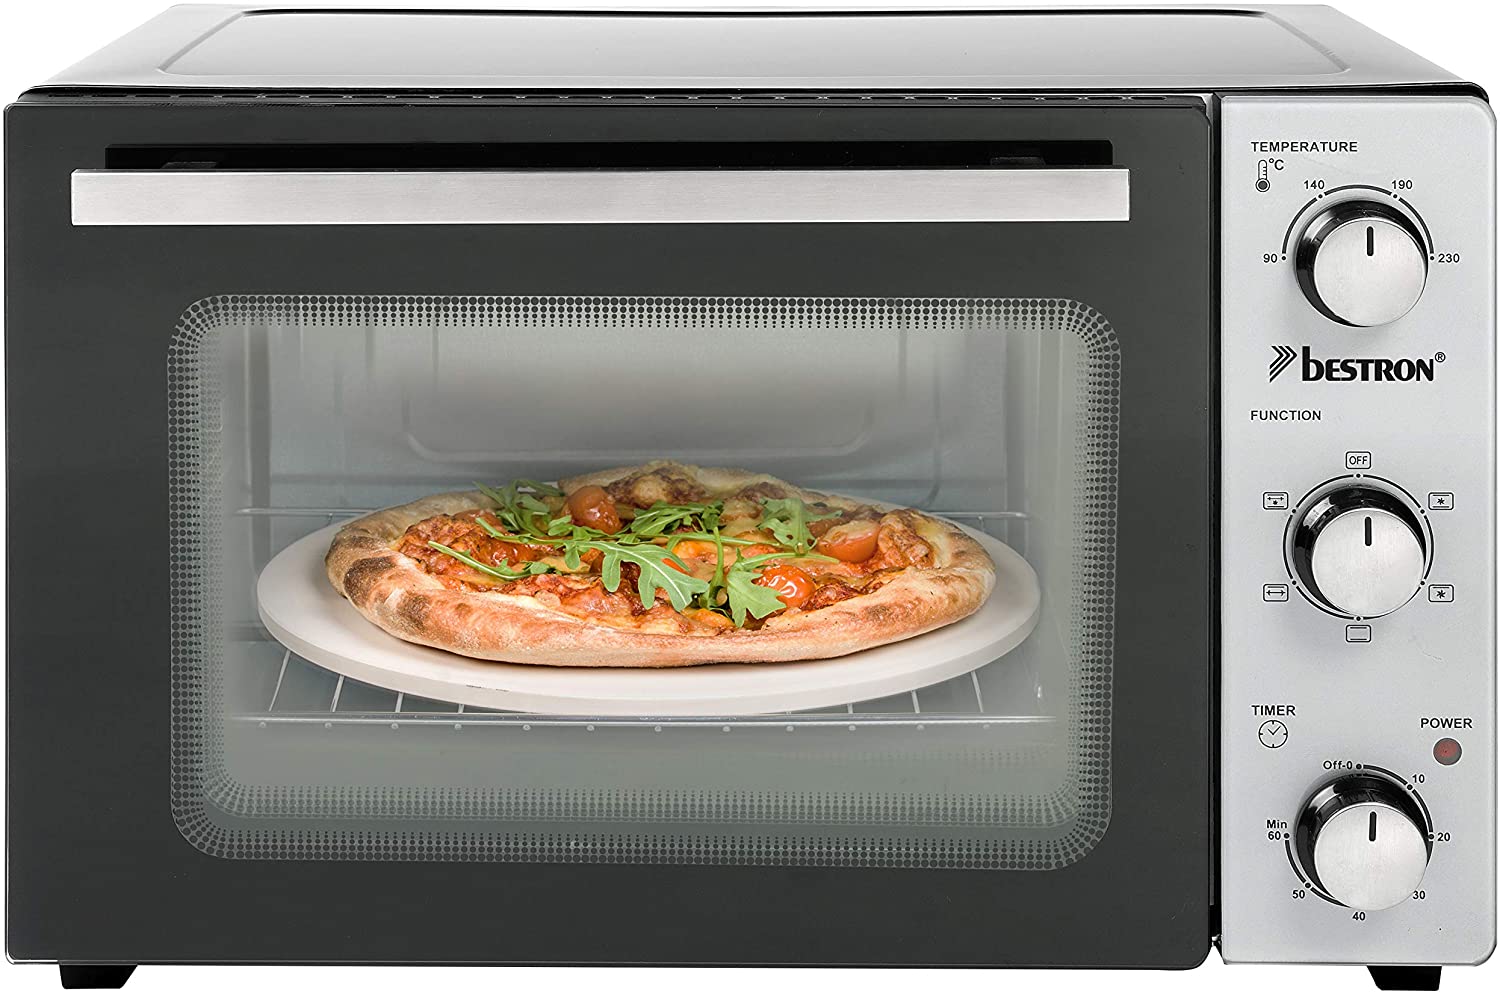 Bestron AOV31PS Compact Mini Oven with Rotisserie and Pizza Stone, 31 Litre, 1500 Watt, Stainless Steel